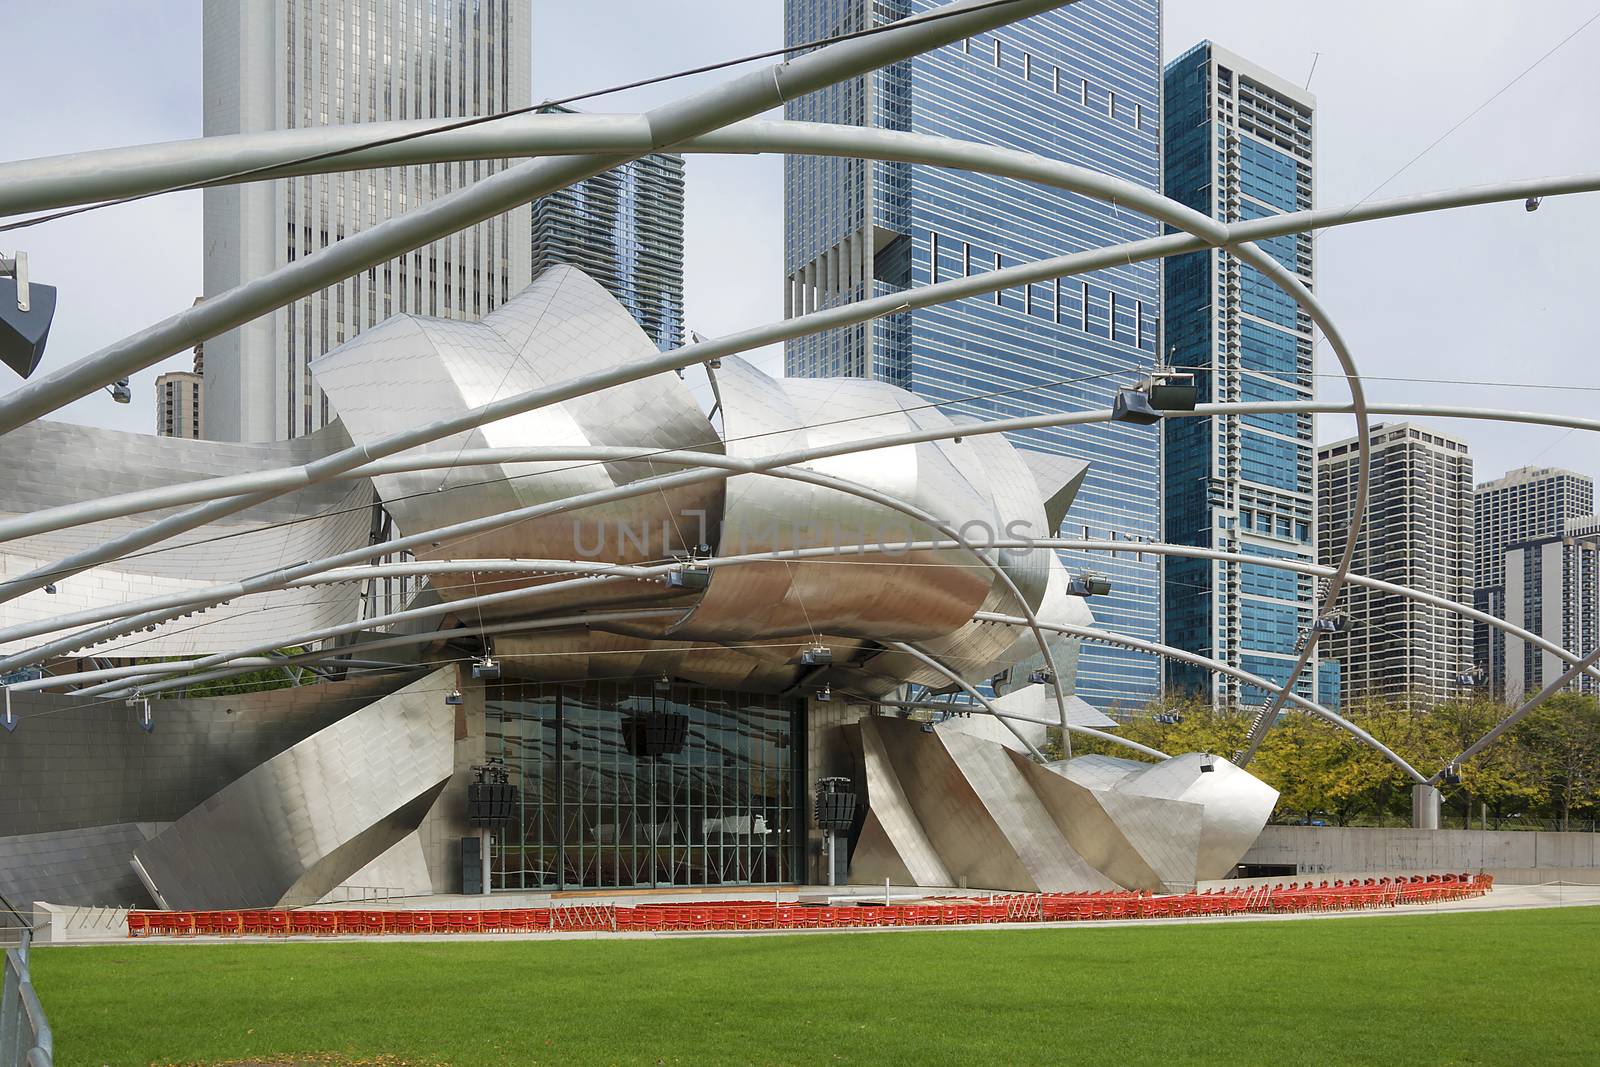 Chicago, IL, USA, Jay Pritzker Pavilion in Millennium Park in Chicago, Illinois.It serves as the centerpiece for Millennium Park and the new home of the Grant Park Symphony Orchestra